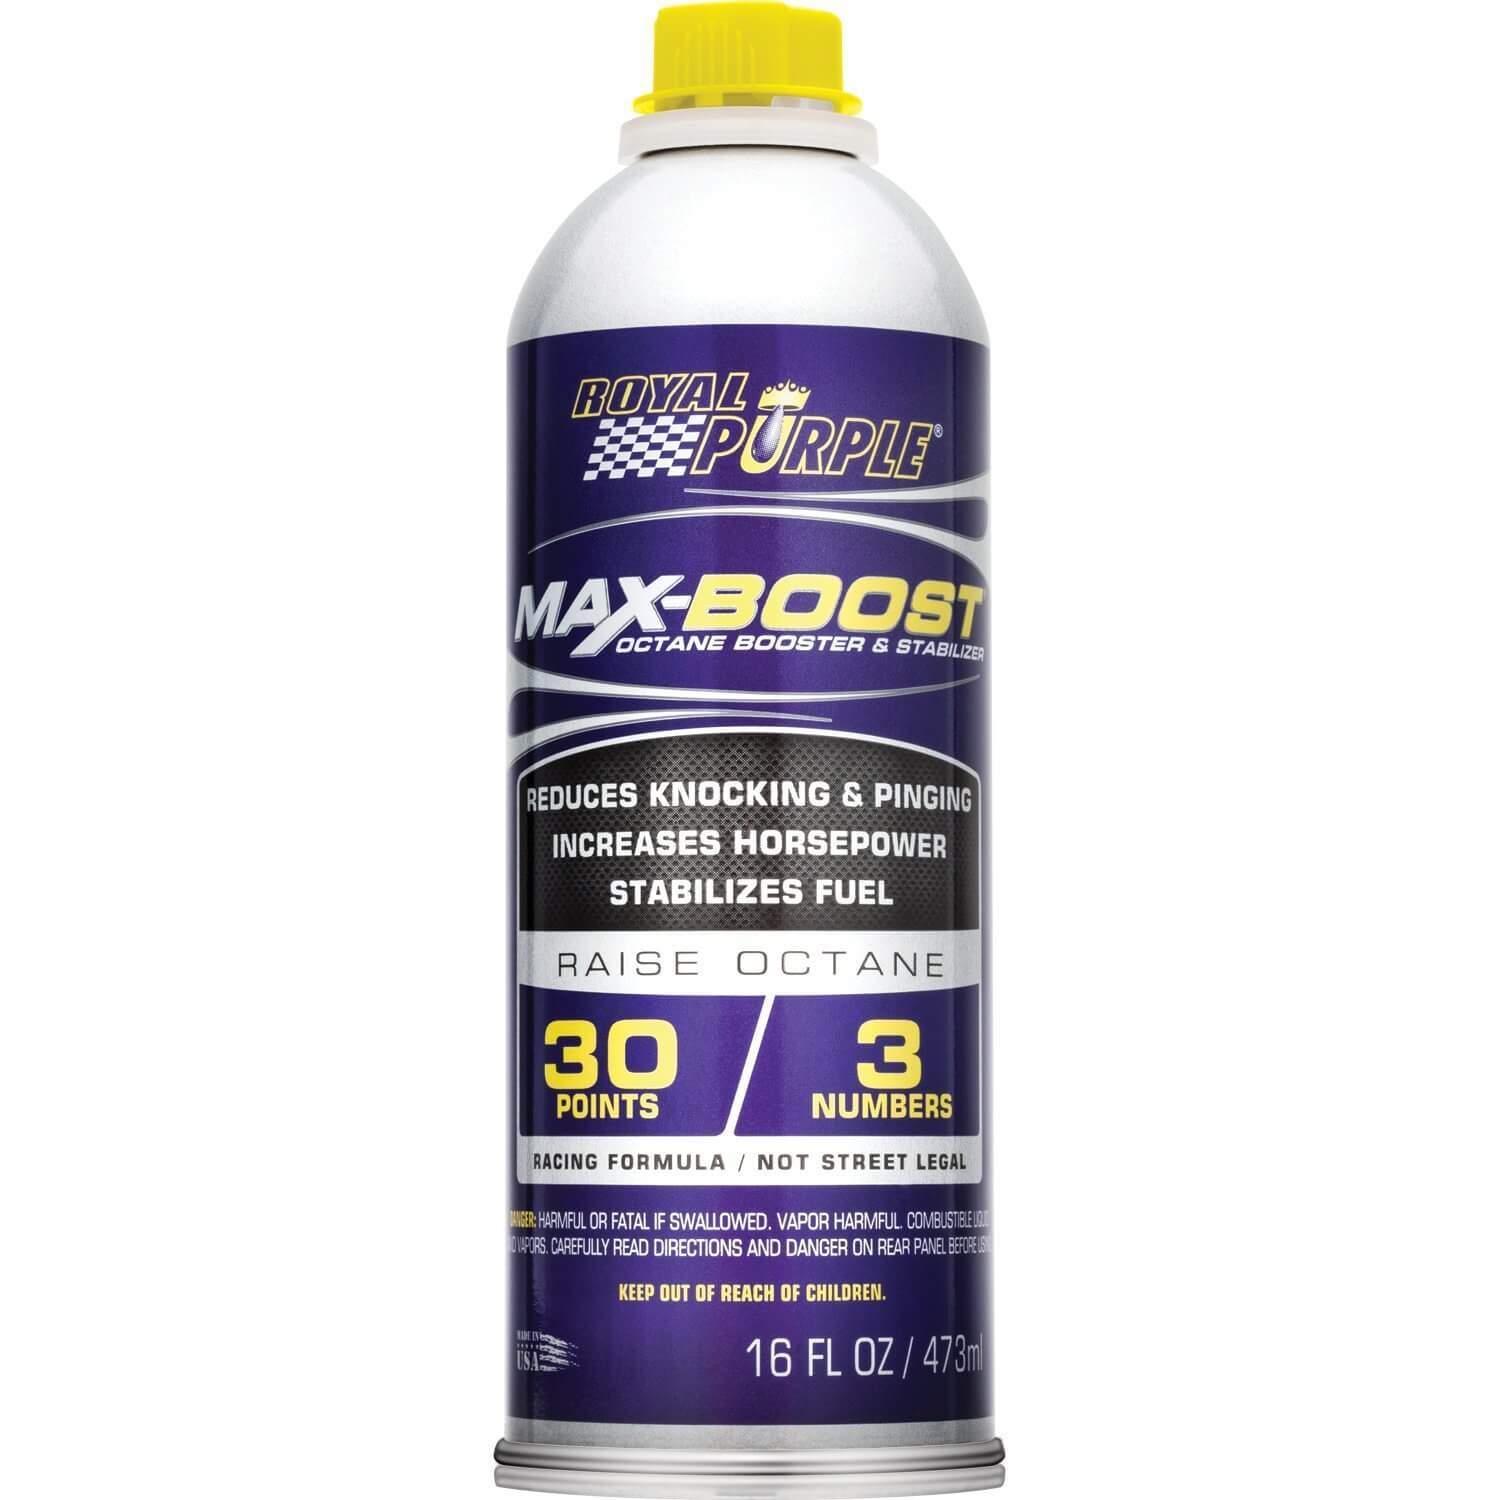 Royal Purple 11757 Max-Boost Octane Booster and Stabilizer